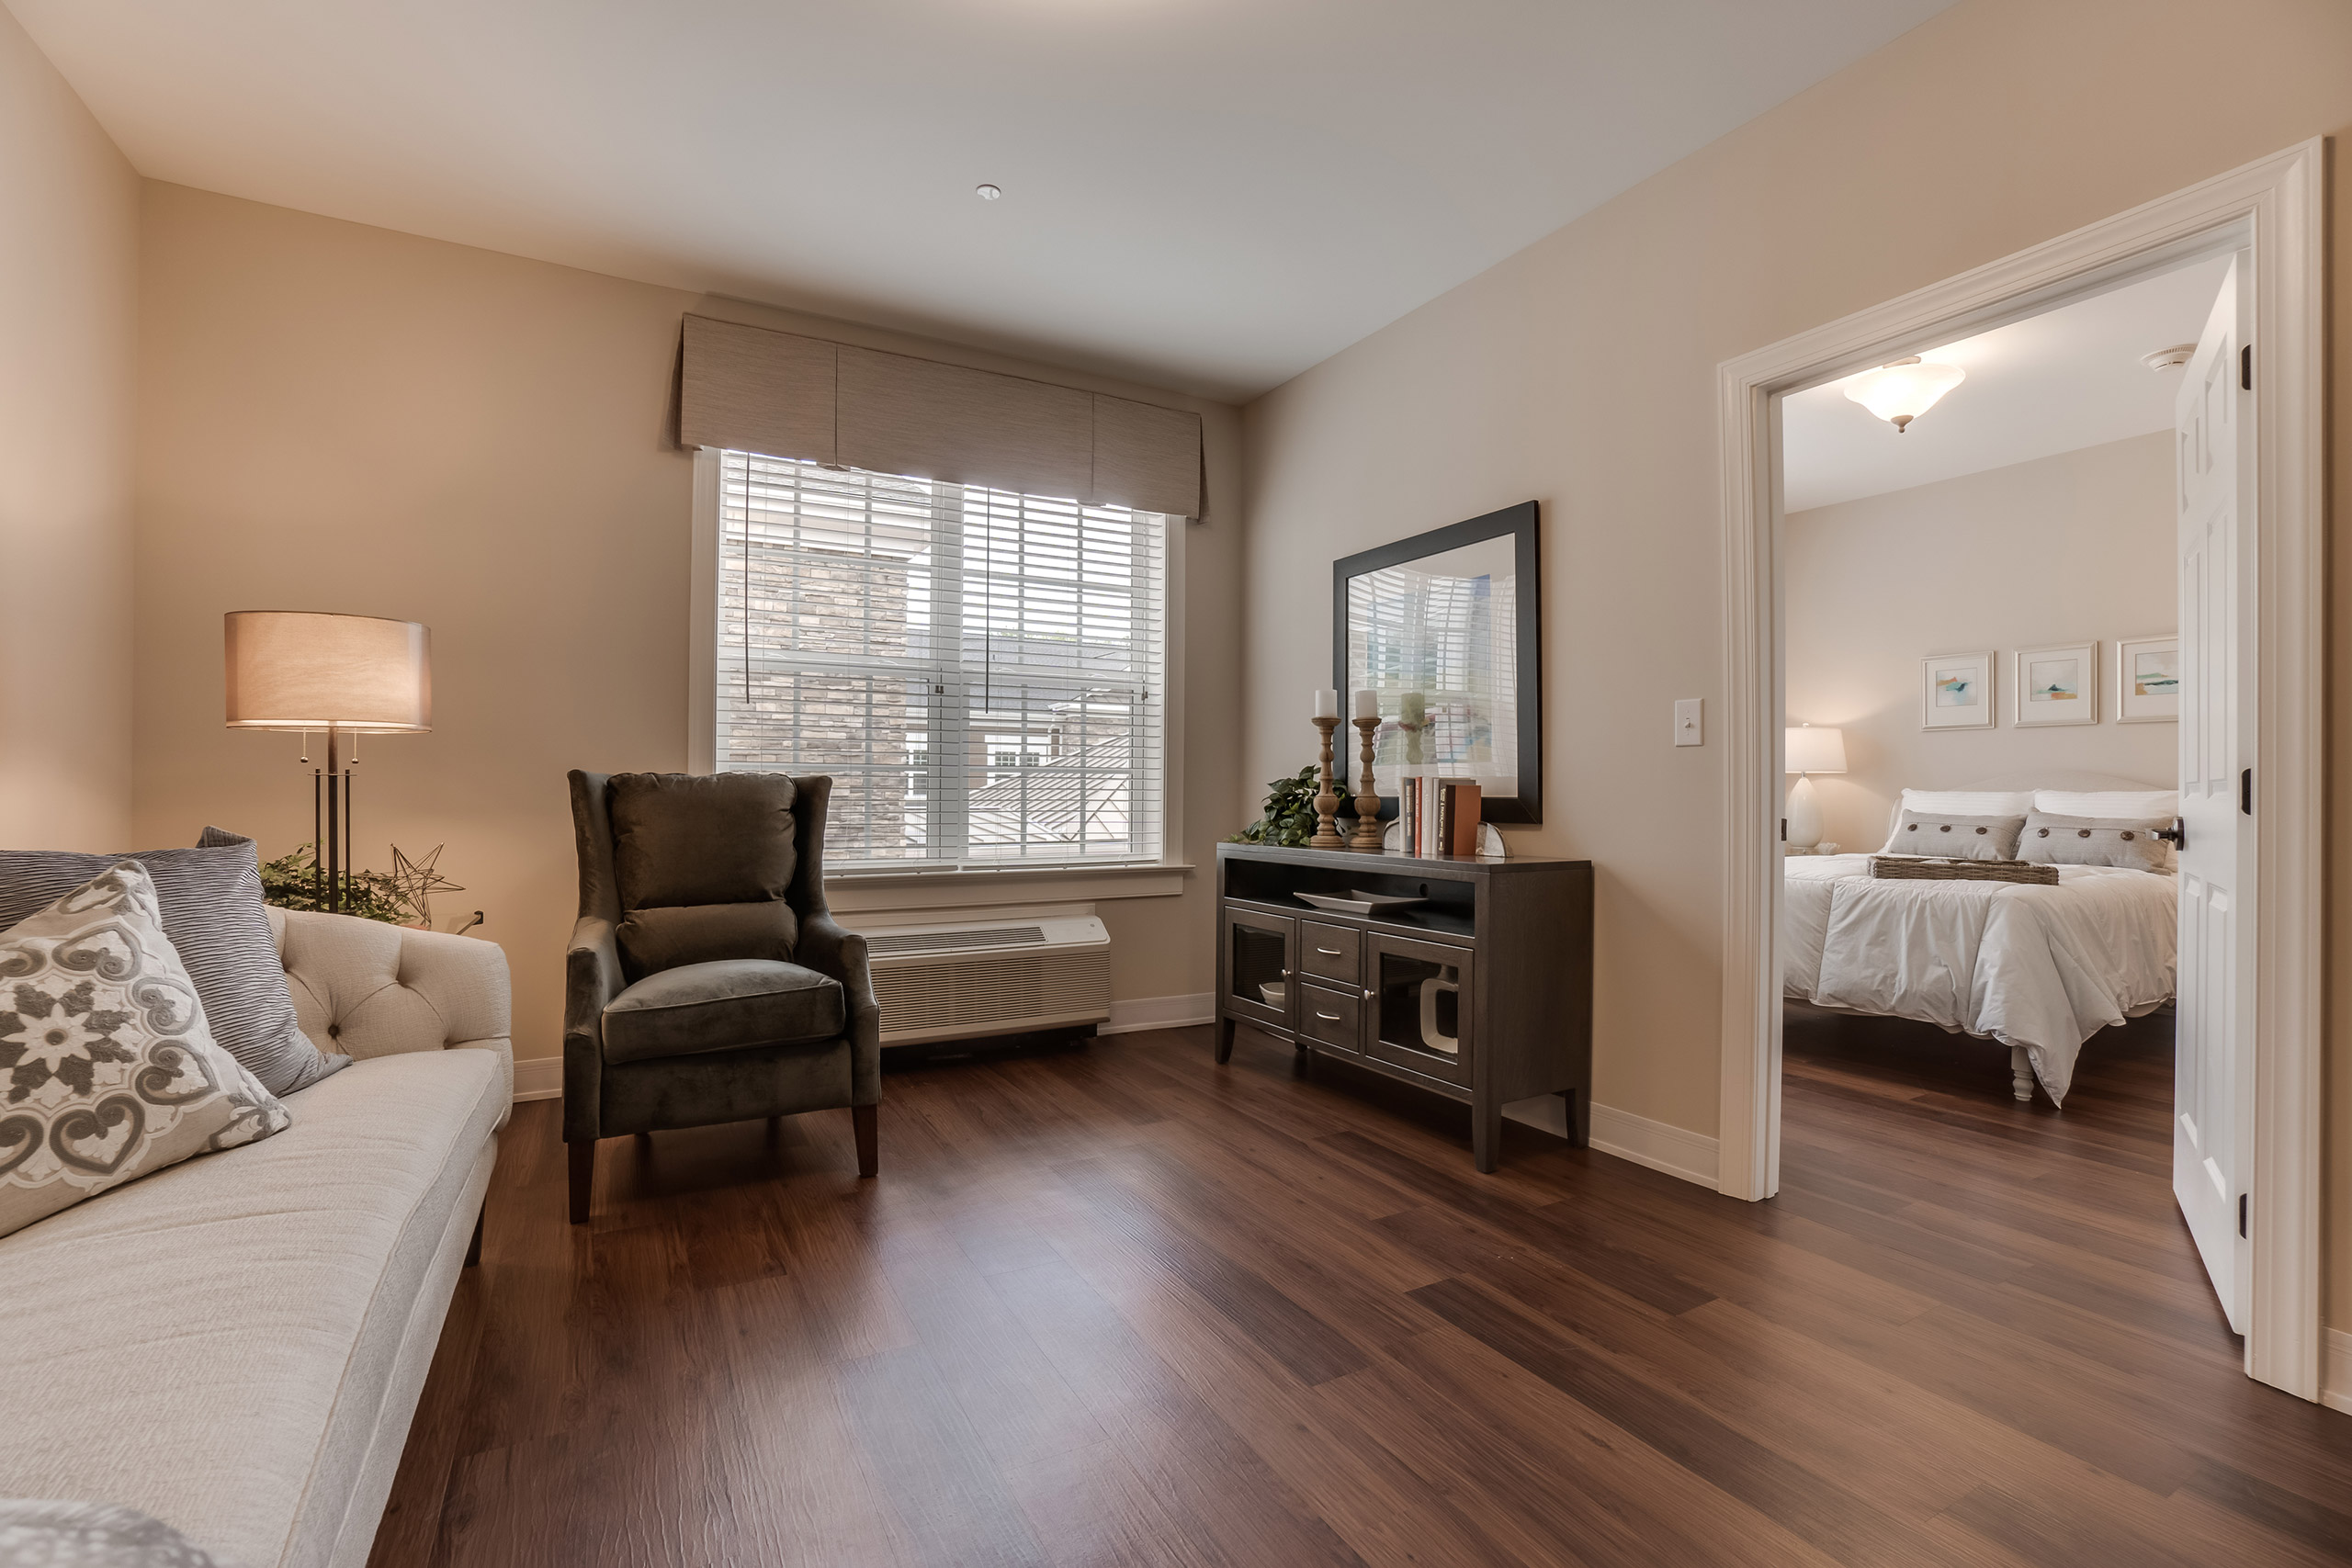 One bedroom units have family rooms with hardwood floors